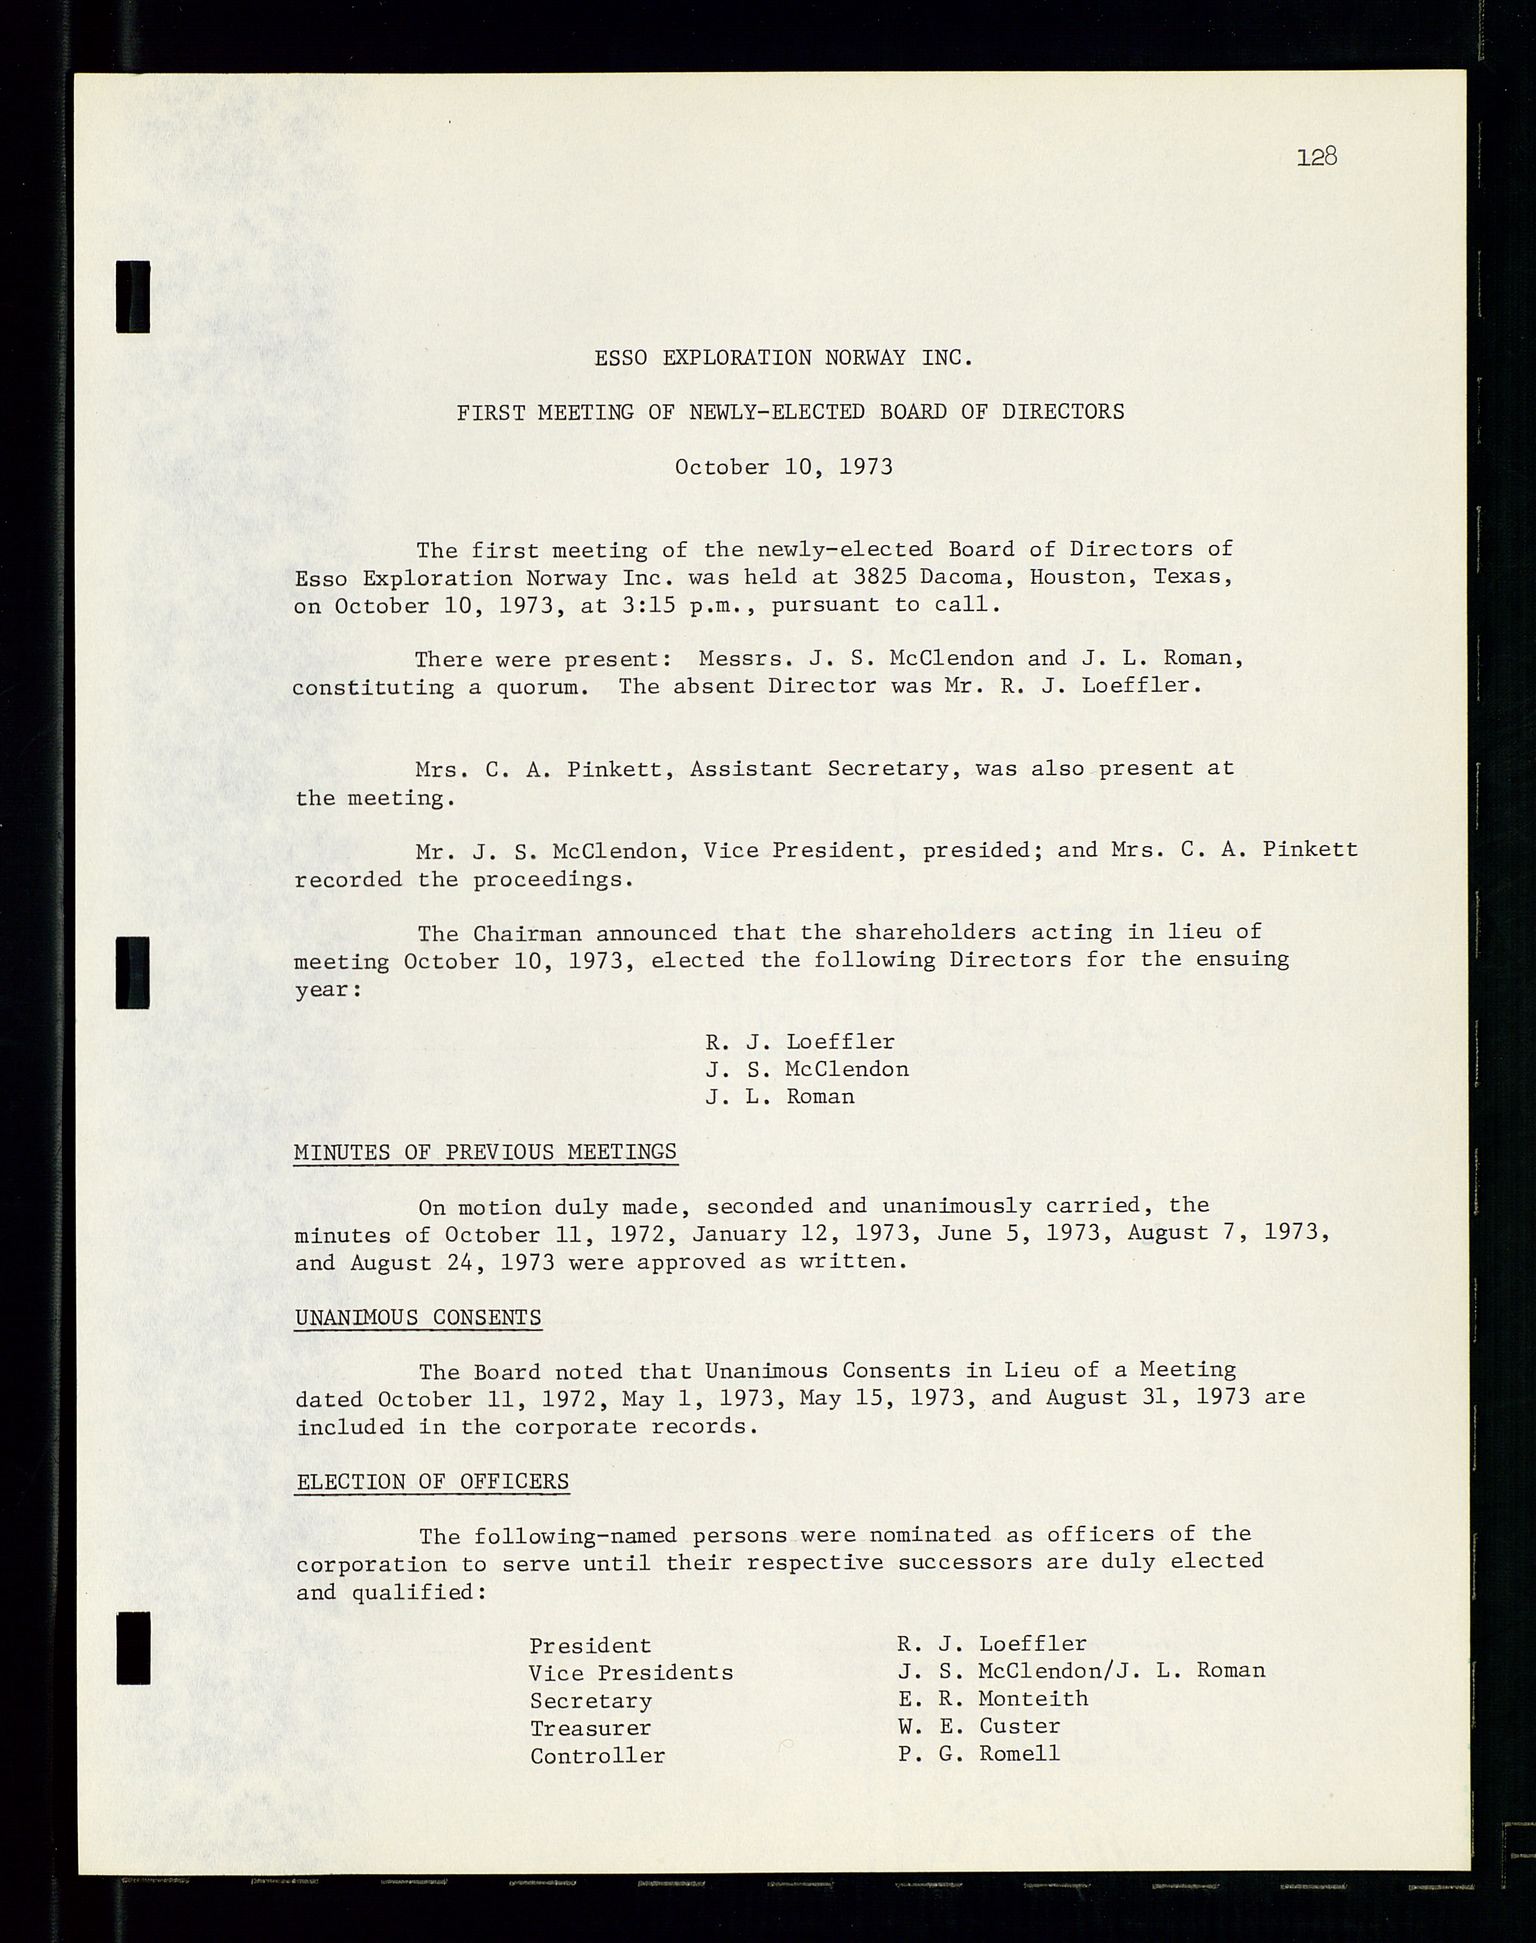 Pa 1512 - Esso Exploration and Production Norway Inc., SAST/A-101917/A/Aa/L0001/0001: Styredokumenter / Corporate records, By-Laws, Board meeting minutes, Incorporations, 1965-1975, s. 128